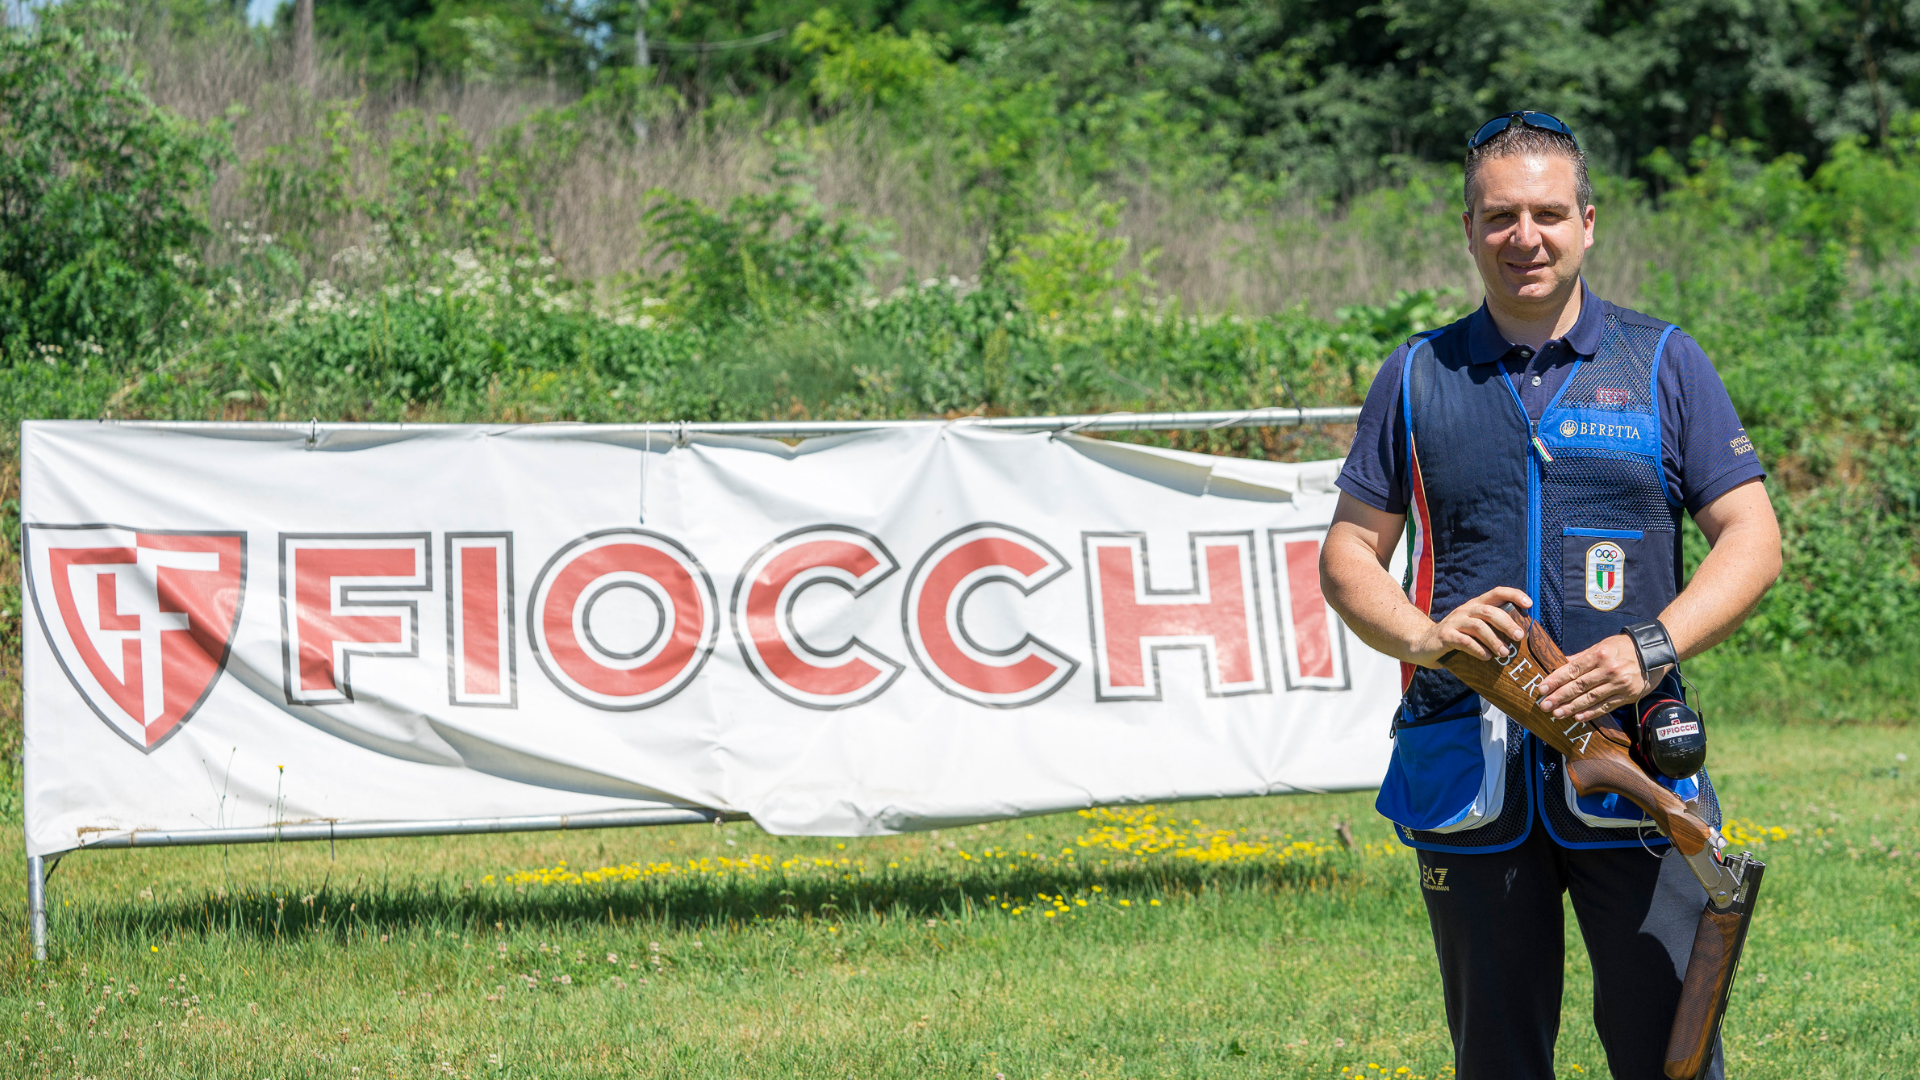 SHOTGUN AND CHARITY WITH FIOCCHI, LIONS AND MARCO INNOCENTI.